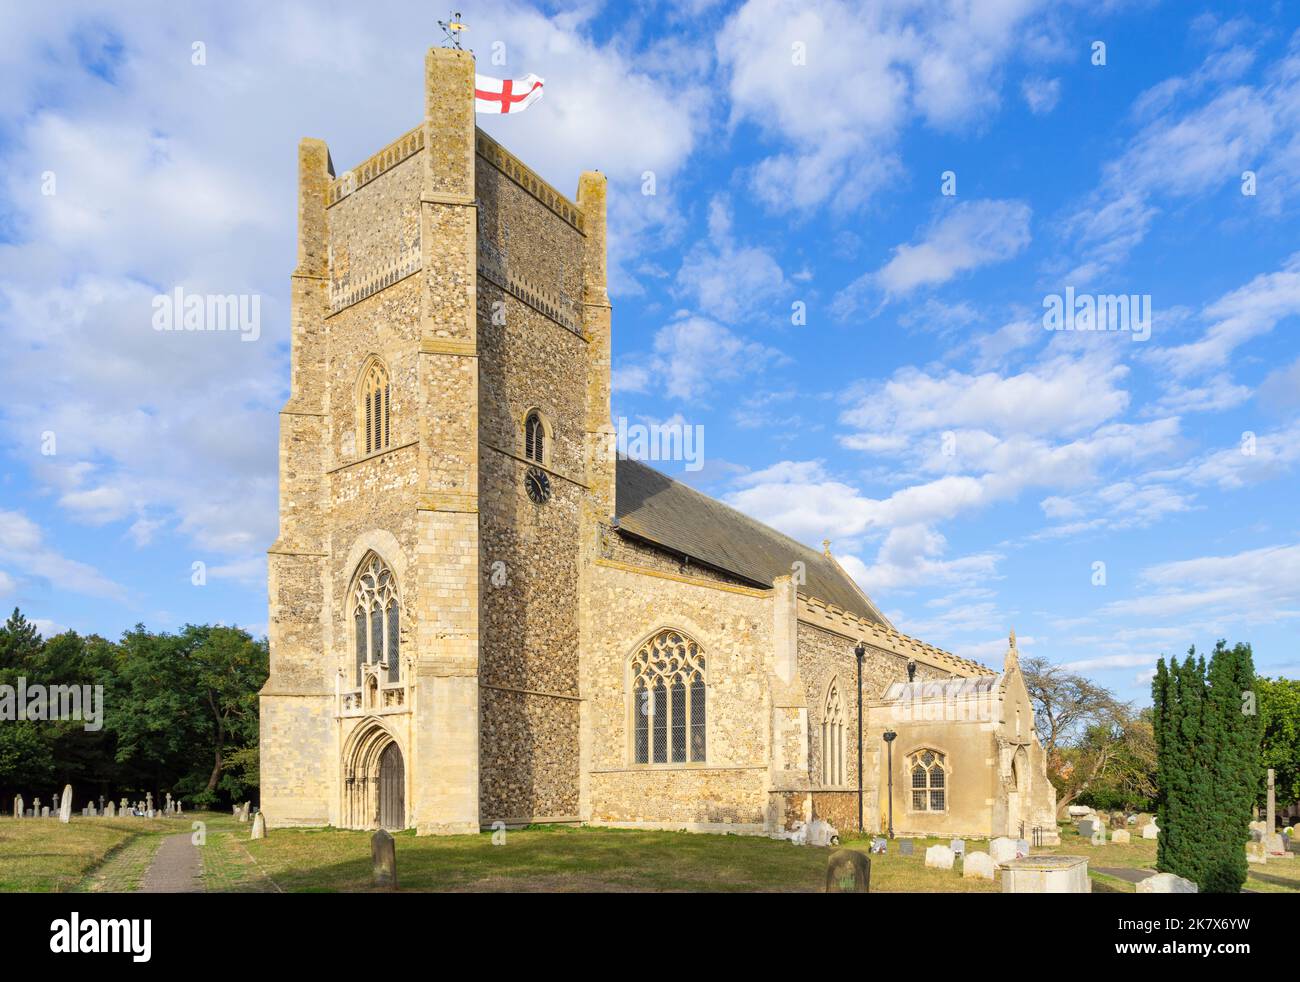 St Bartholomew's Church a medieval church in the village of Orford Suffolk England UK Europe Stock Photo